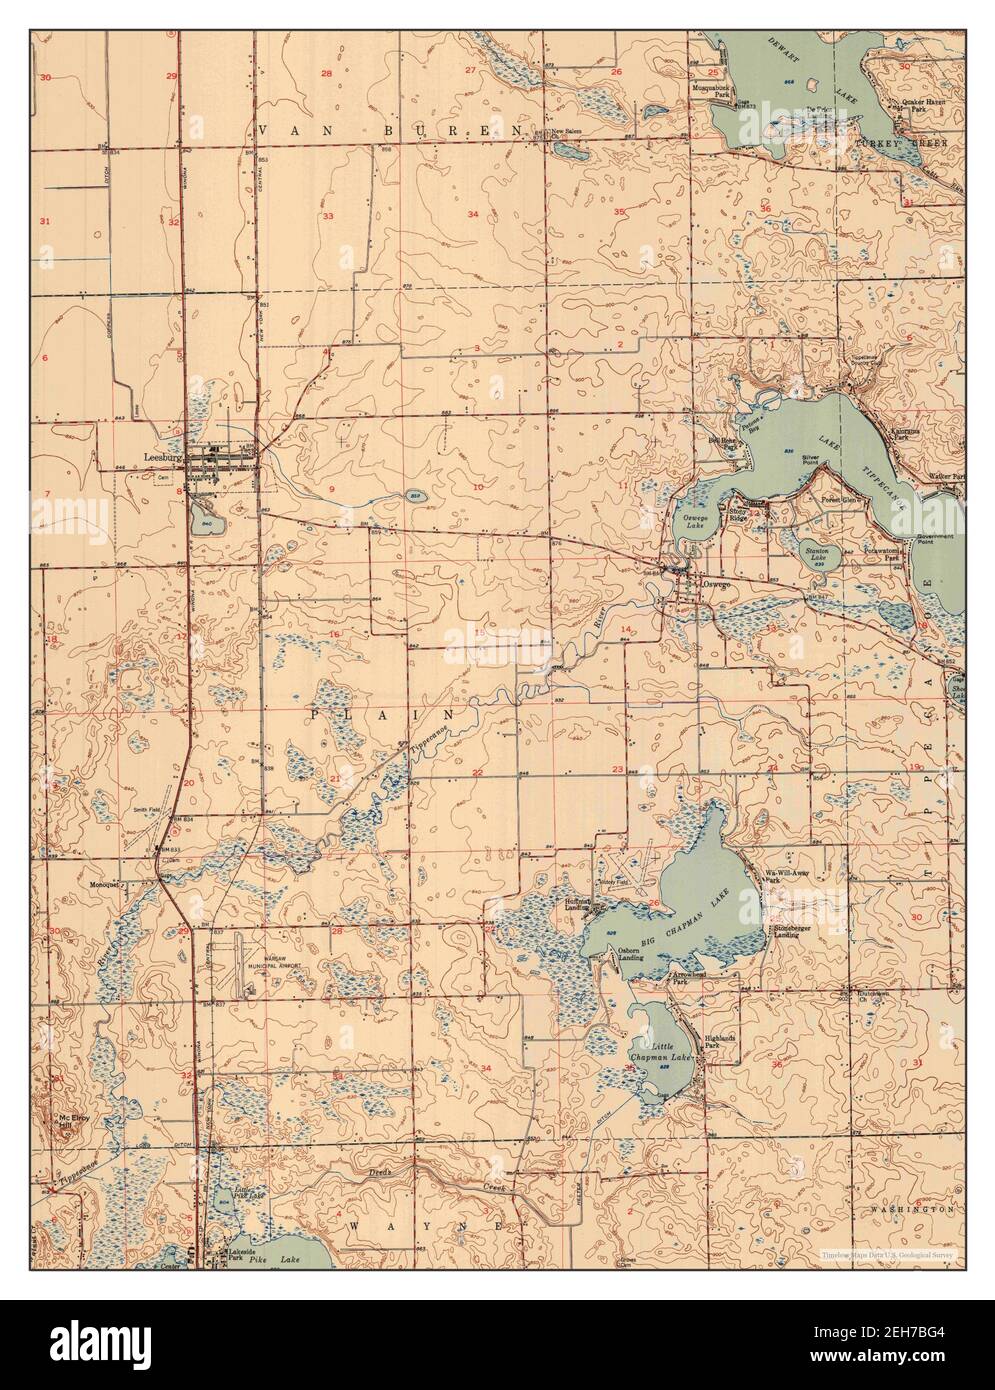 Leesburg, Indiana, map 1950, 1:24000, United States of America by Timeless Maps, data U.S. Geological Survey Stock Photo